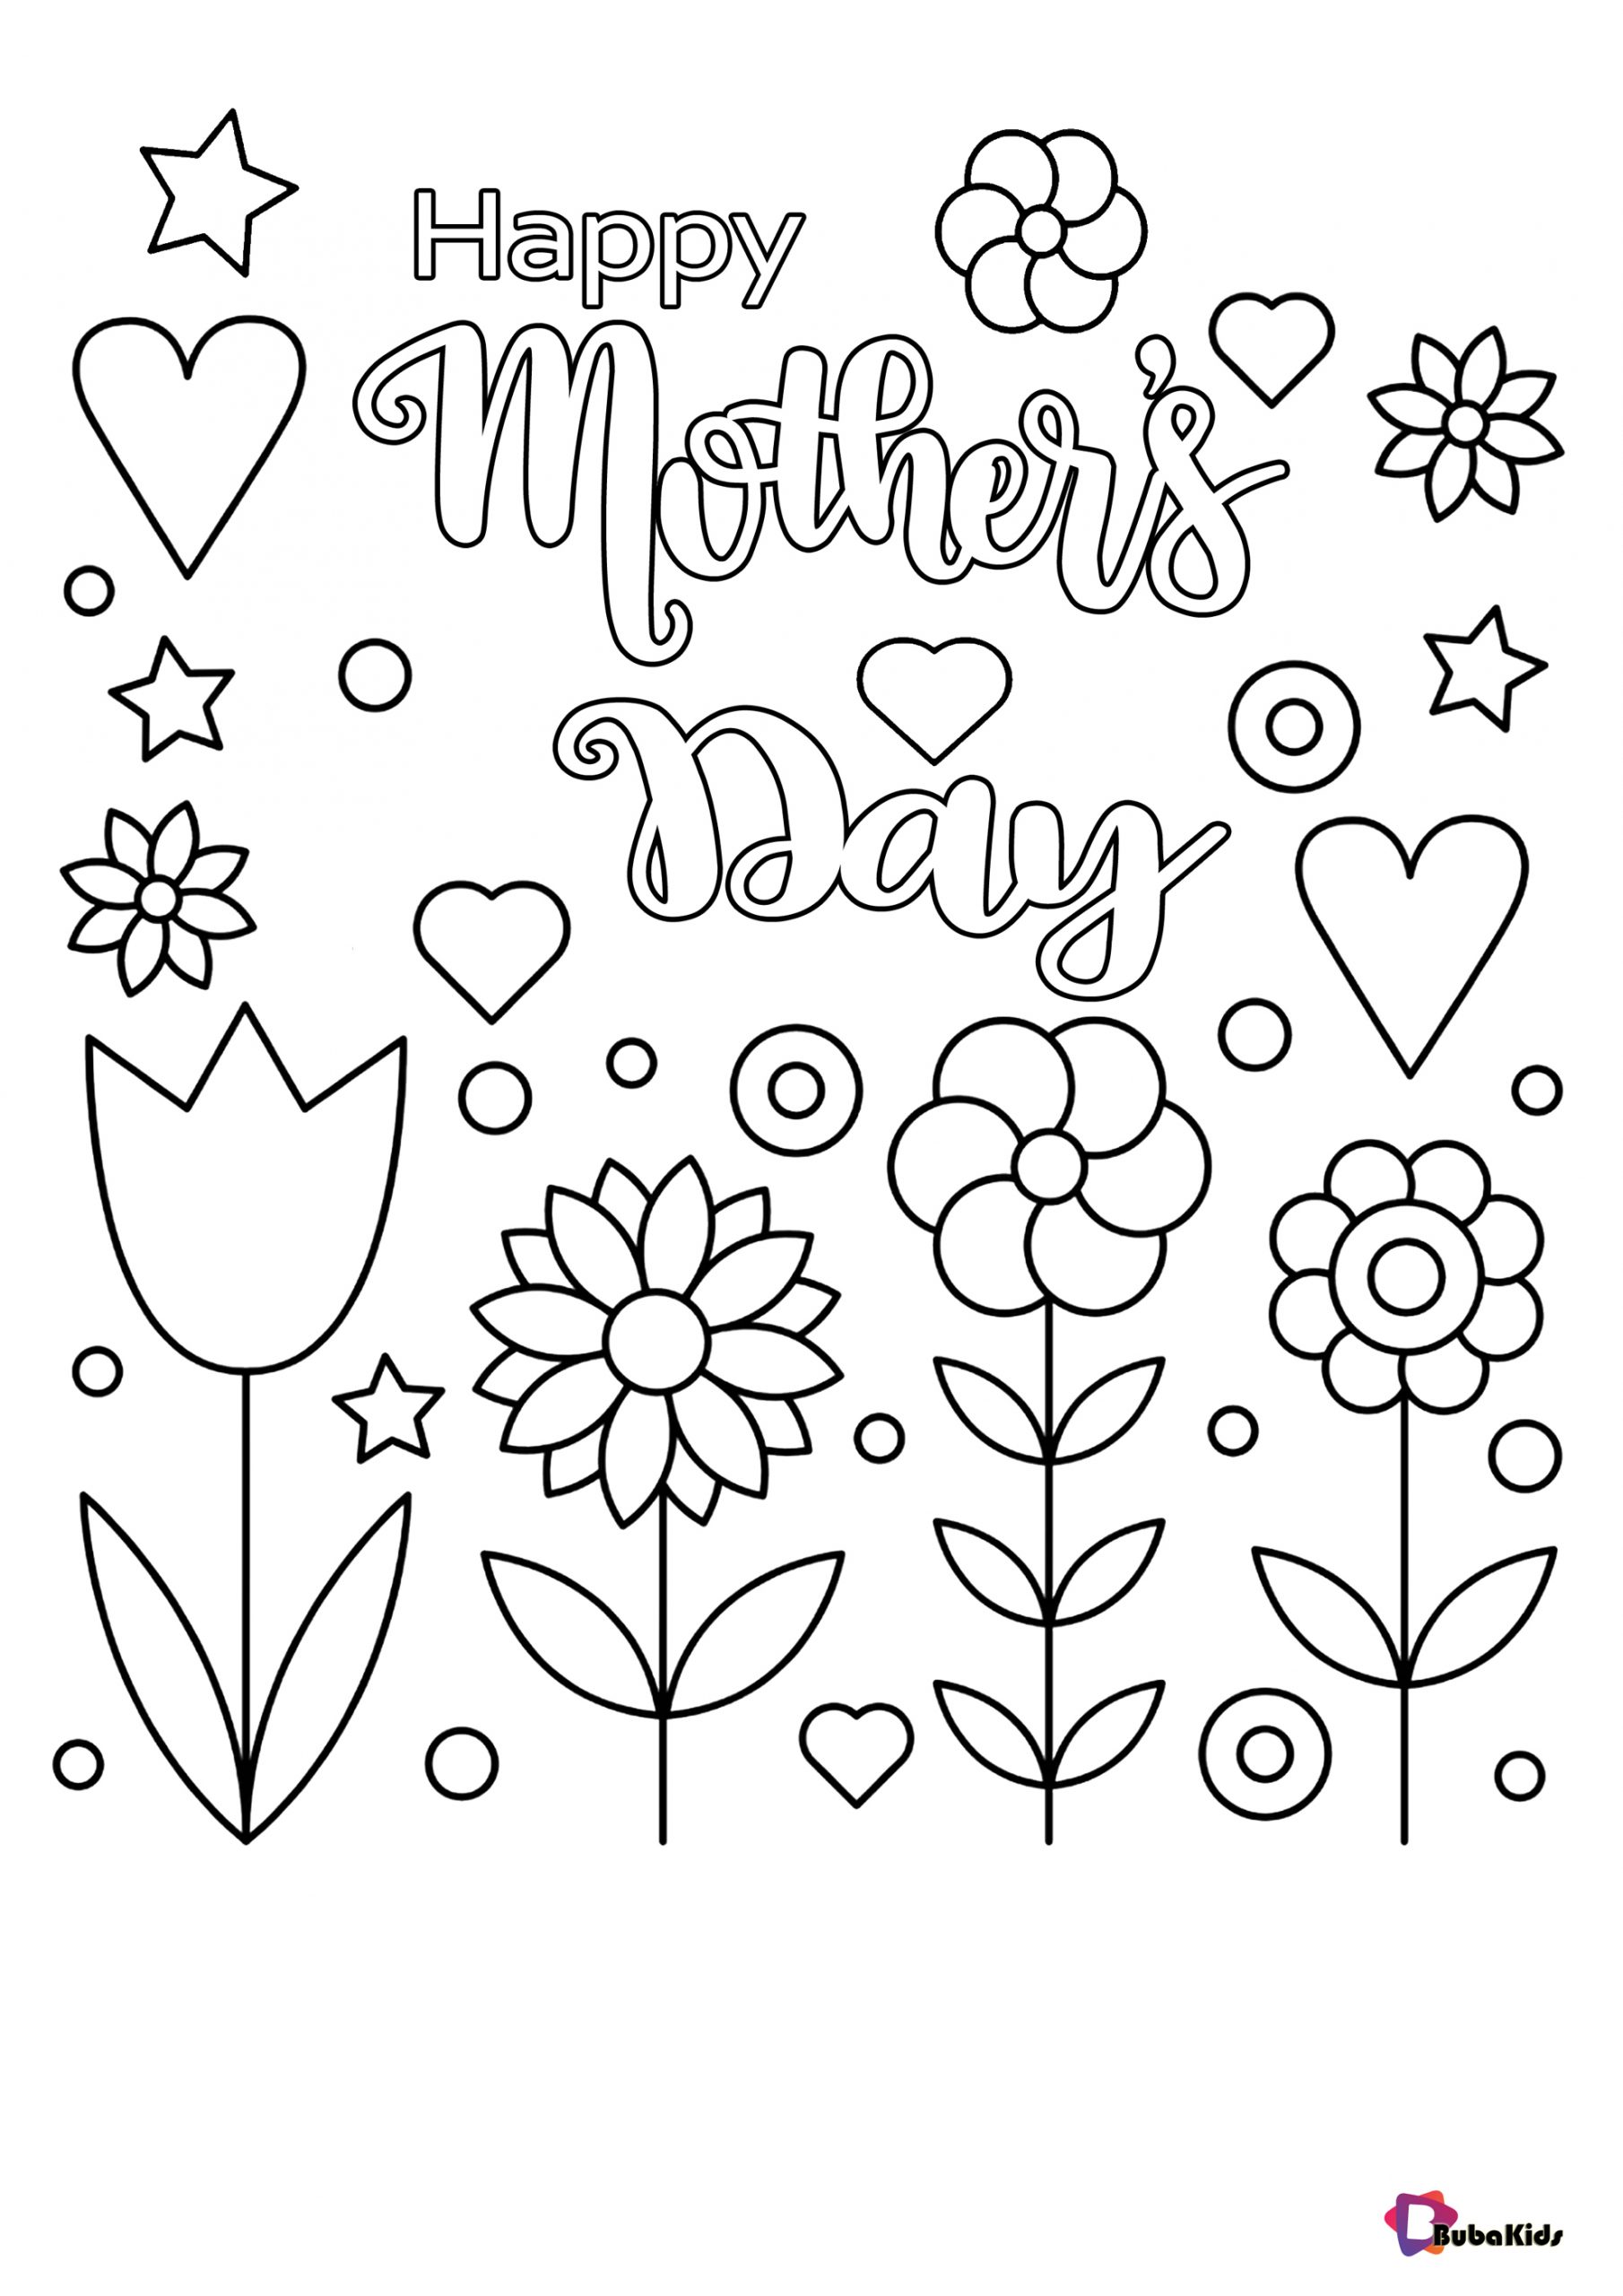 printable-mothers-day-coloring-pages